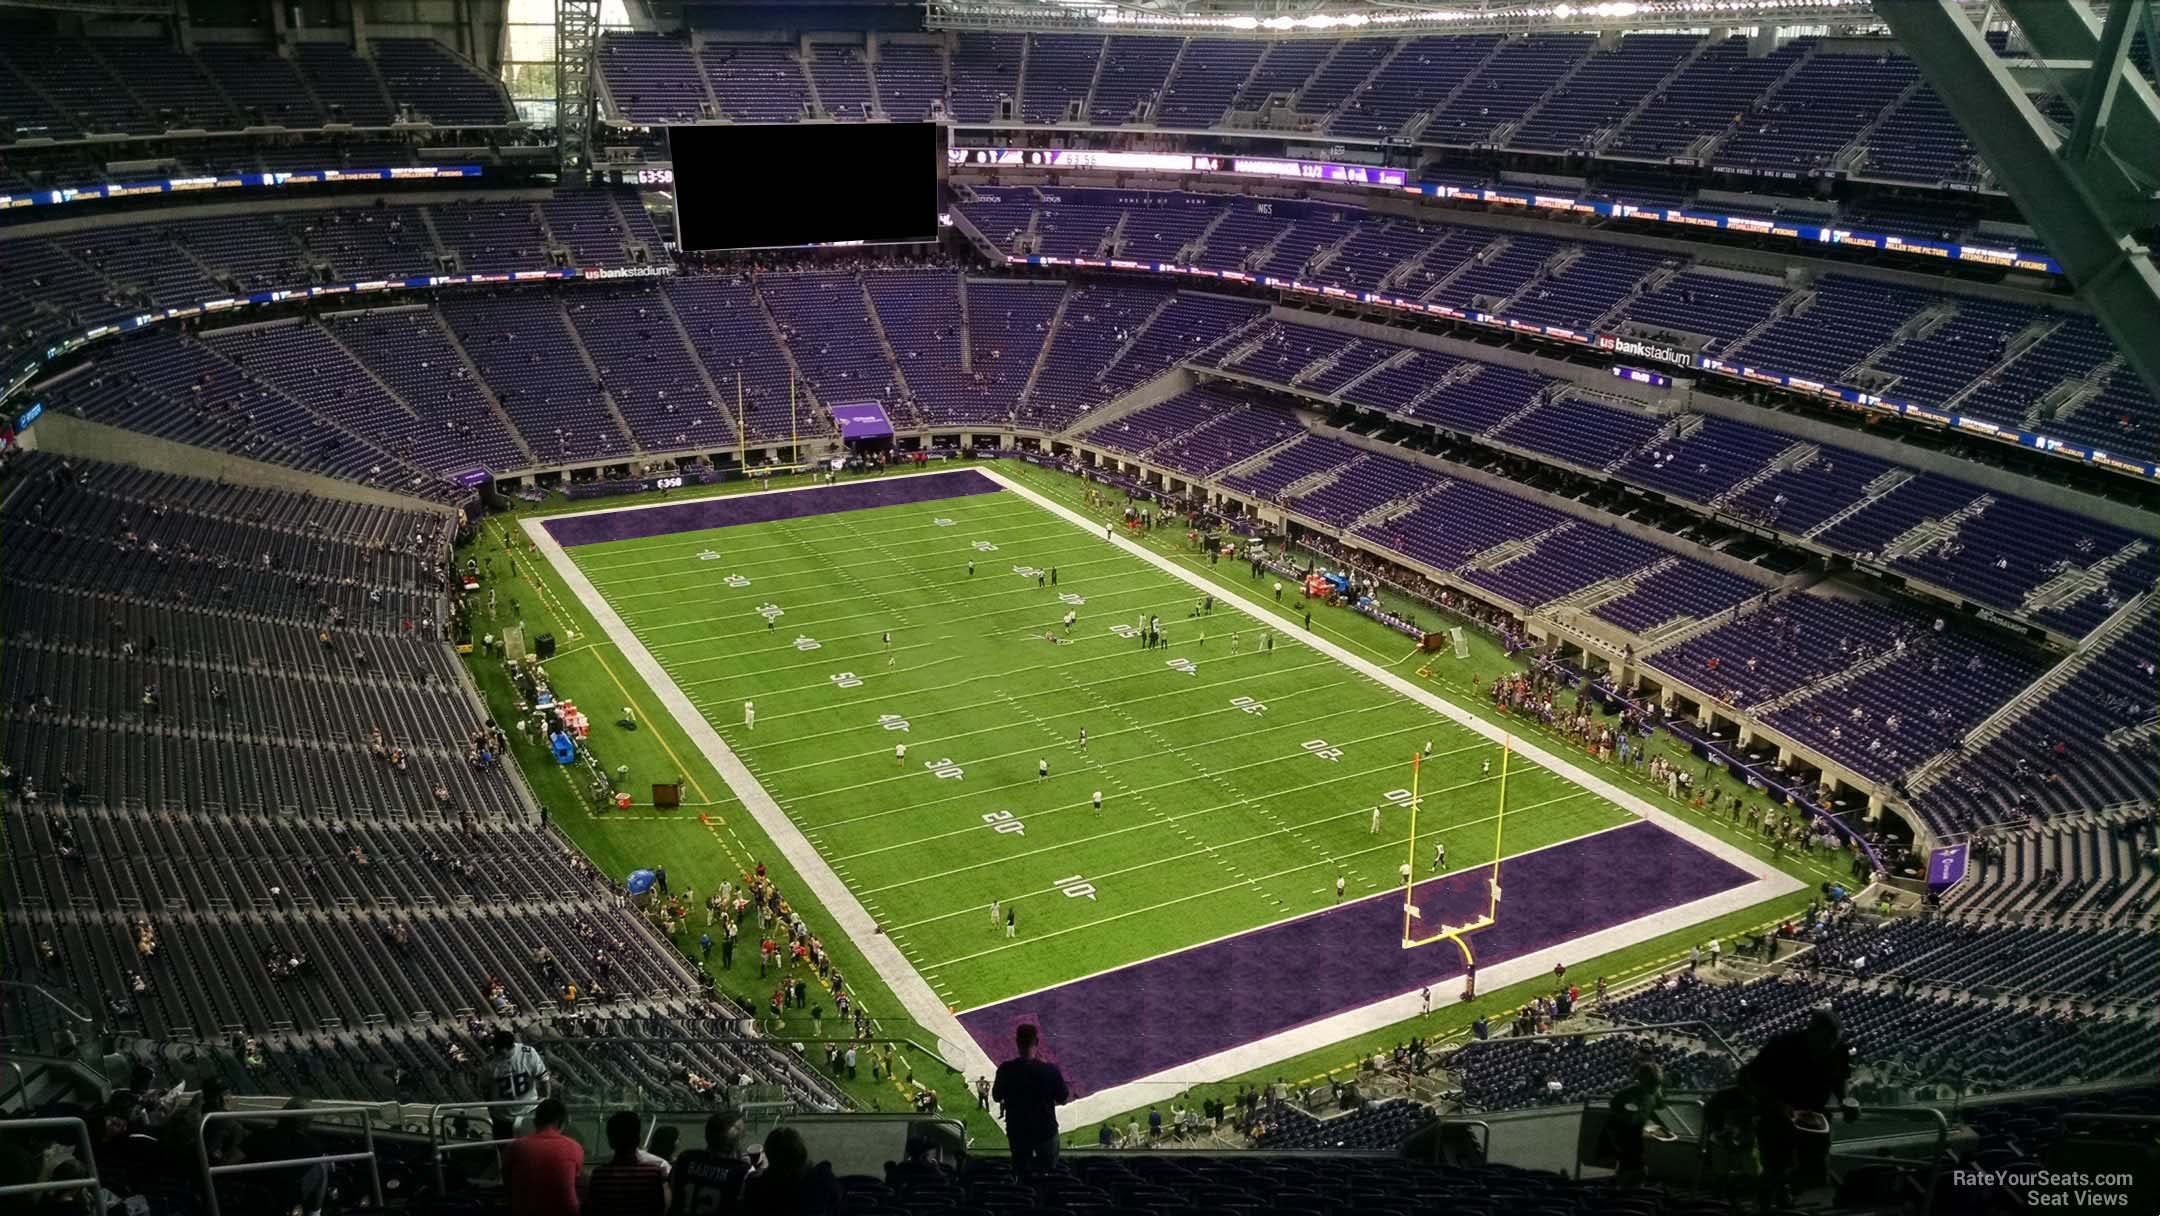 section 302, row 15 seat view  for football - u.s. bank stadium